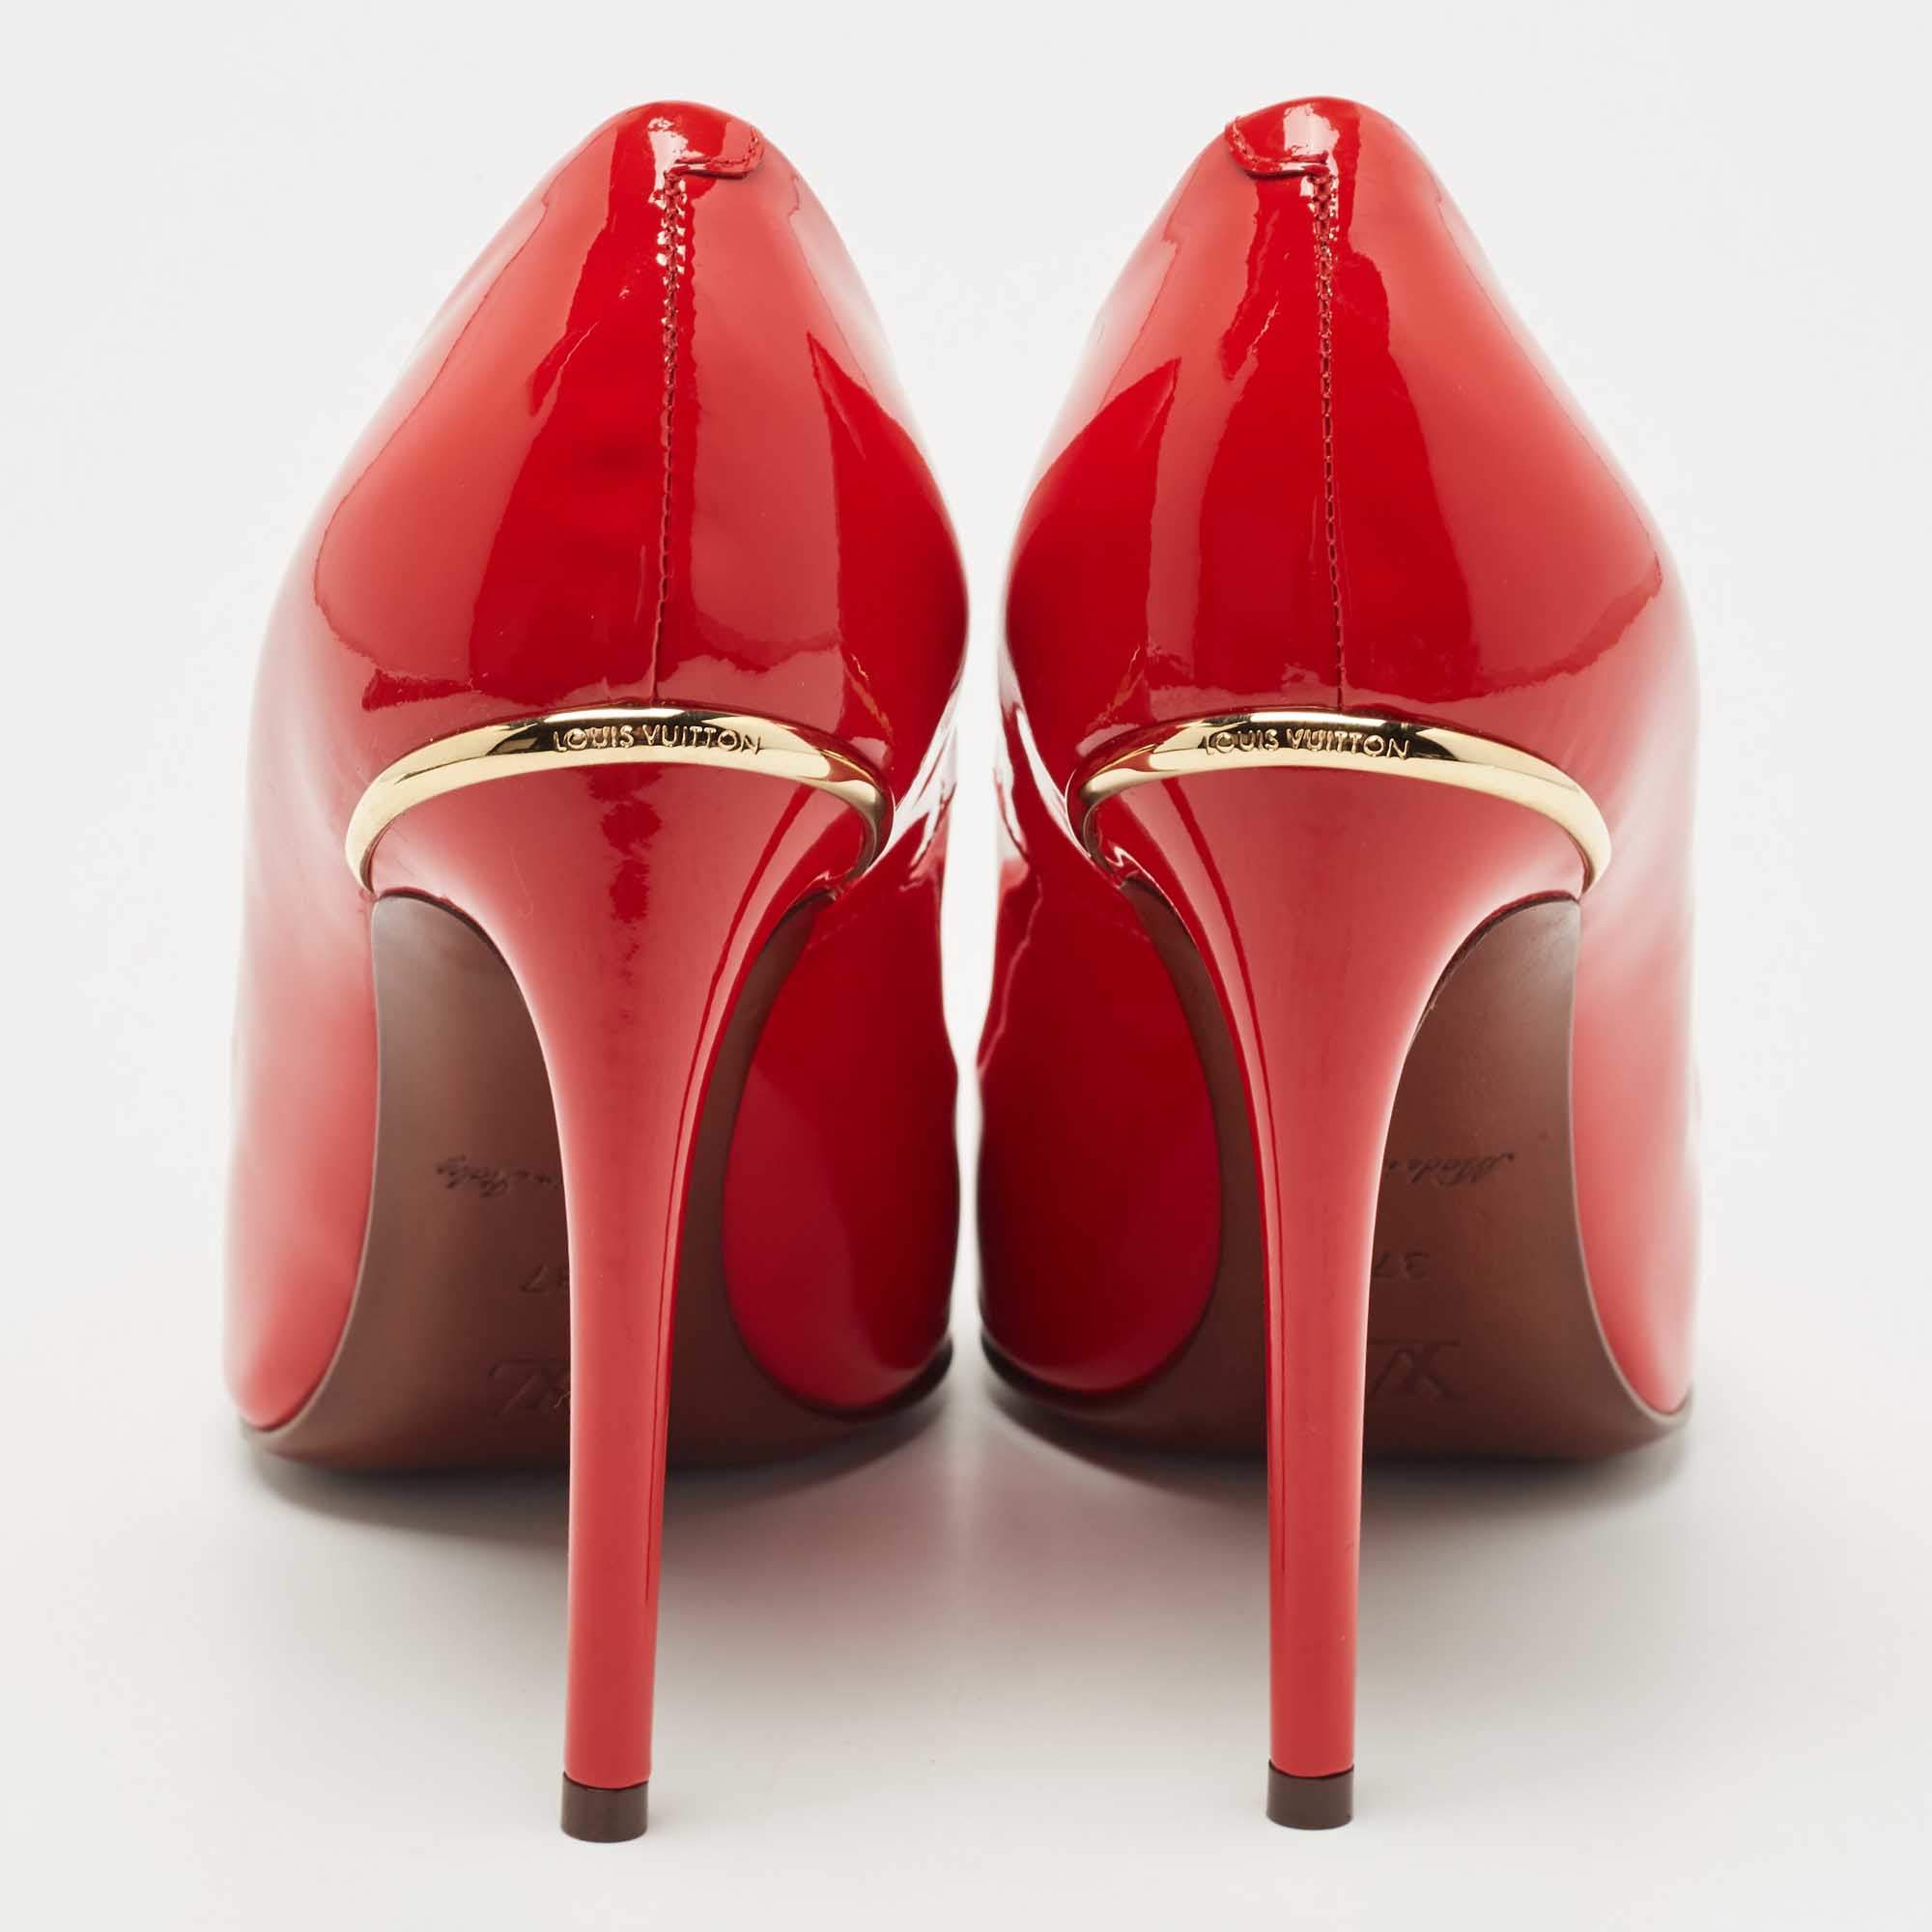 Louis Vuitton Eyeline Red Pump Heels pointed toe patent leather